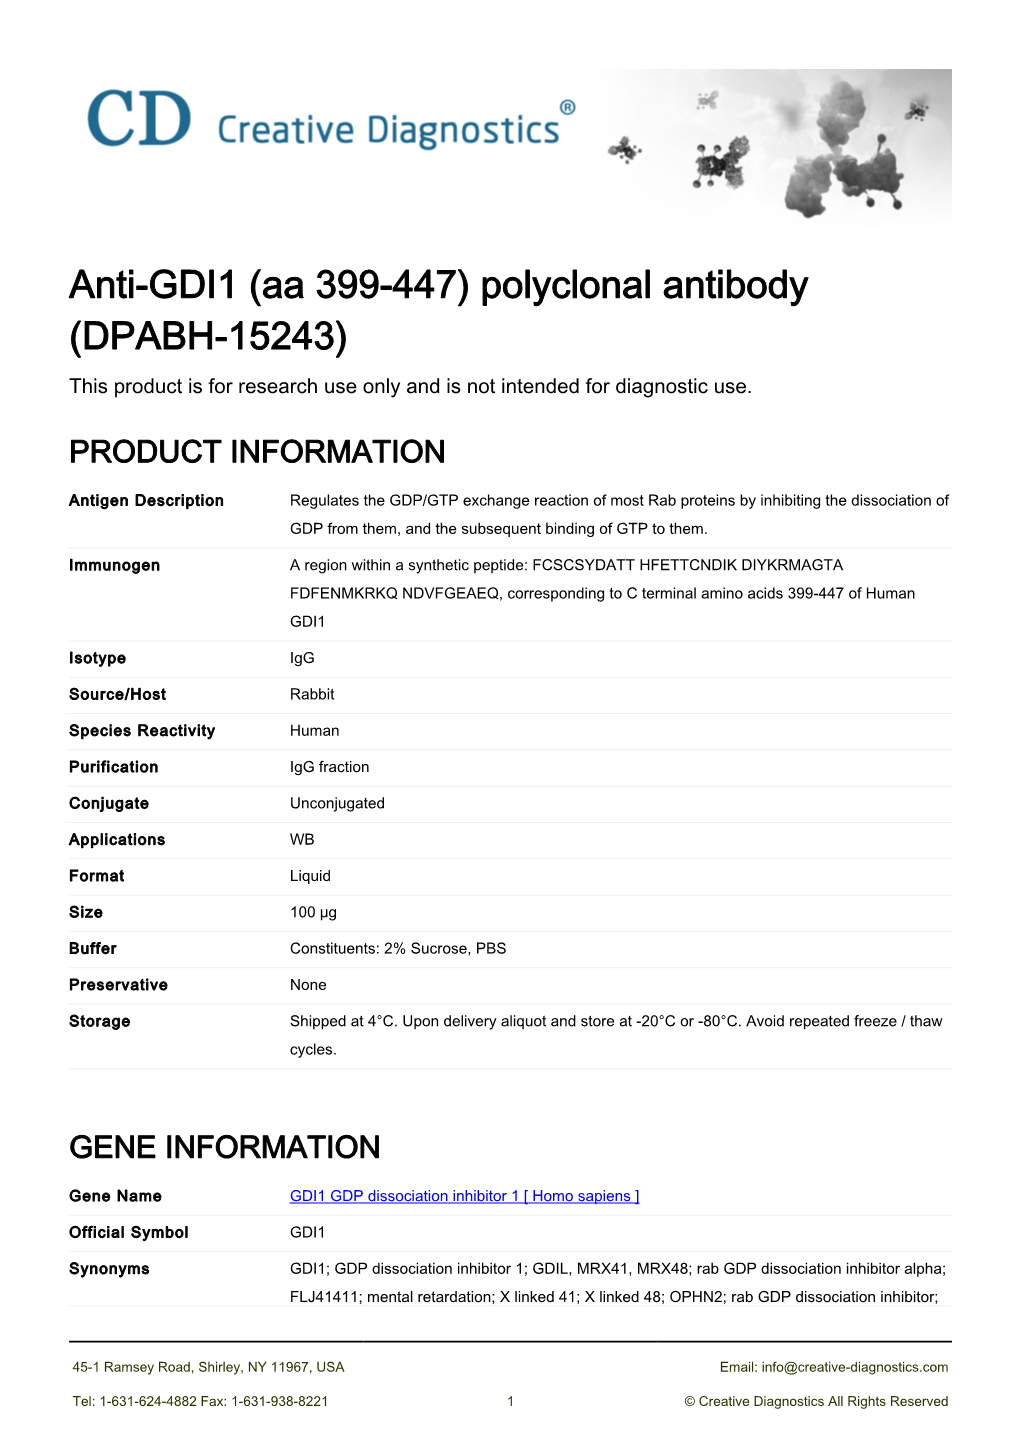 Anti-GDI1 (Aa 399-447) Polyclonal Antibody (DPABH-15243) This Product Is for Research Use Only and Is Not Intended for Diagnostic Use